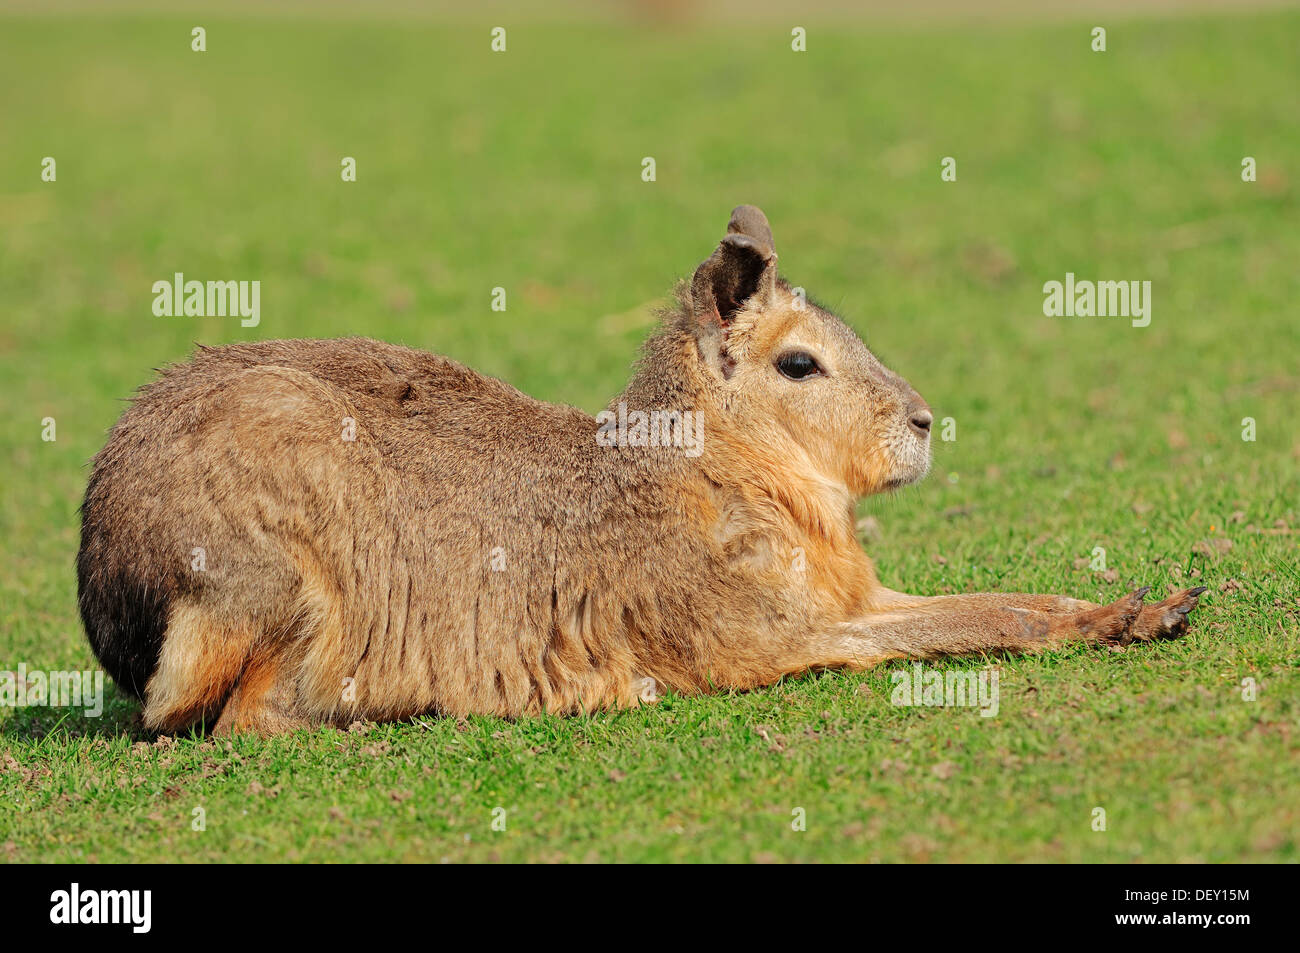 Patagonian Mara or Patagonian Cavy (Dolichotis patagonum), native to Argentina, South America, in captivity Stock Photo